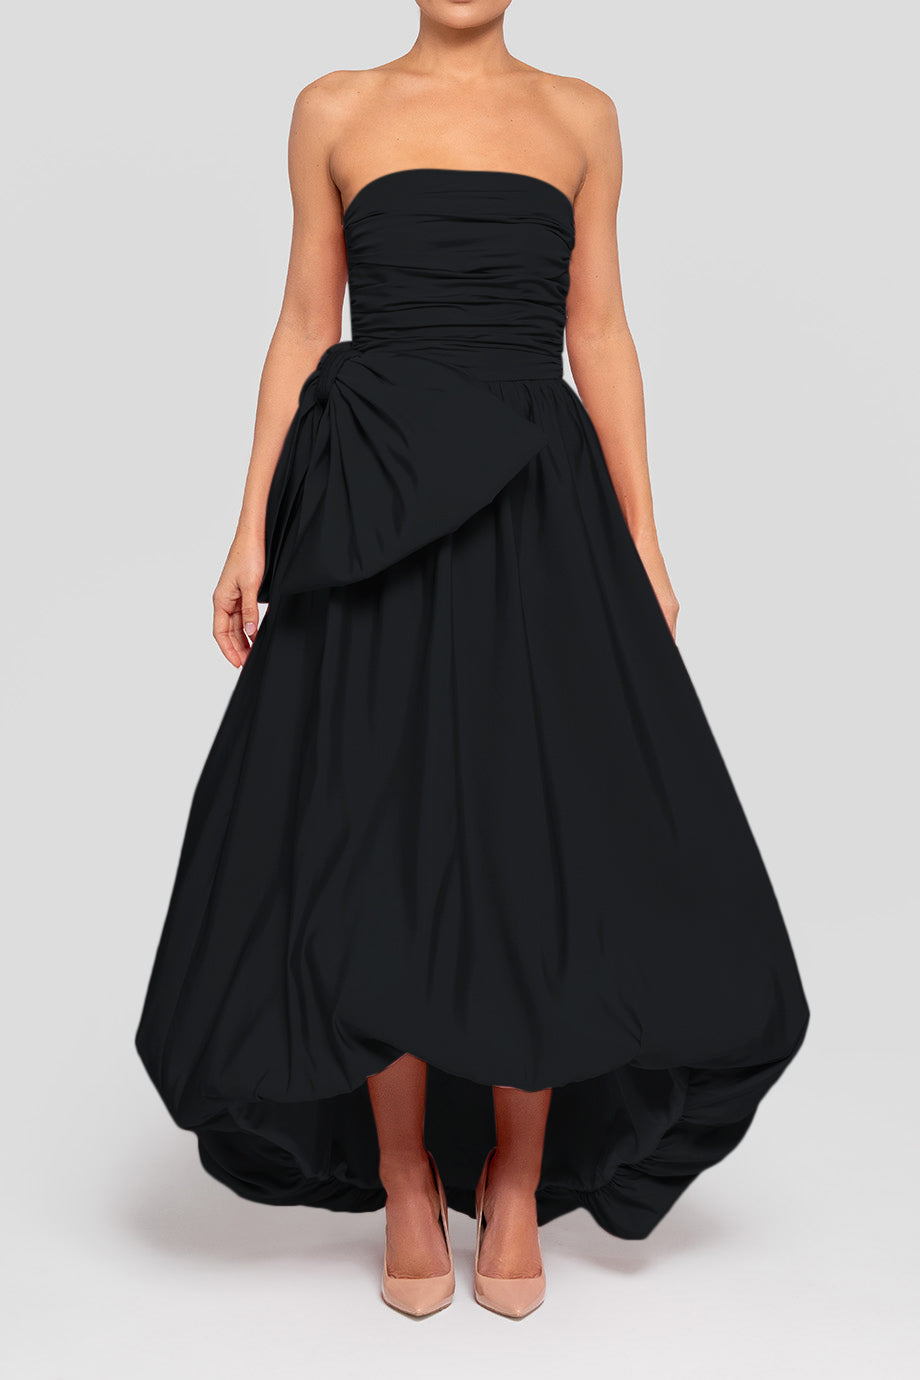 Clementine Silk Faille High Low Gown